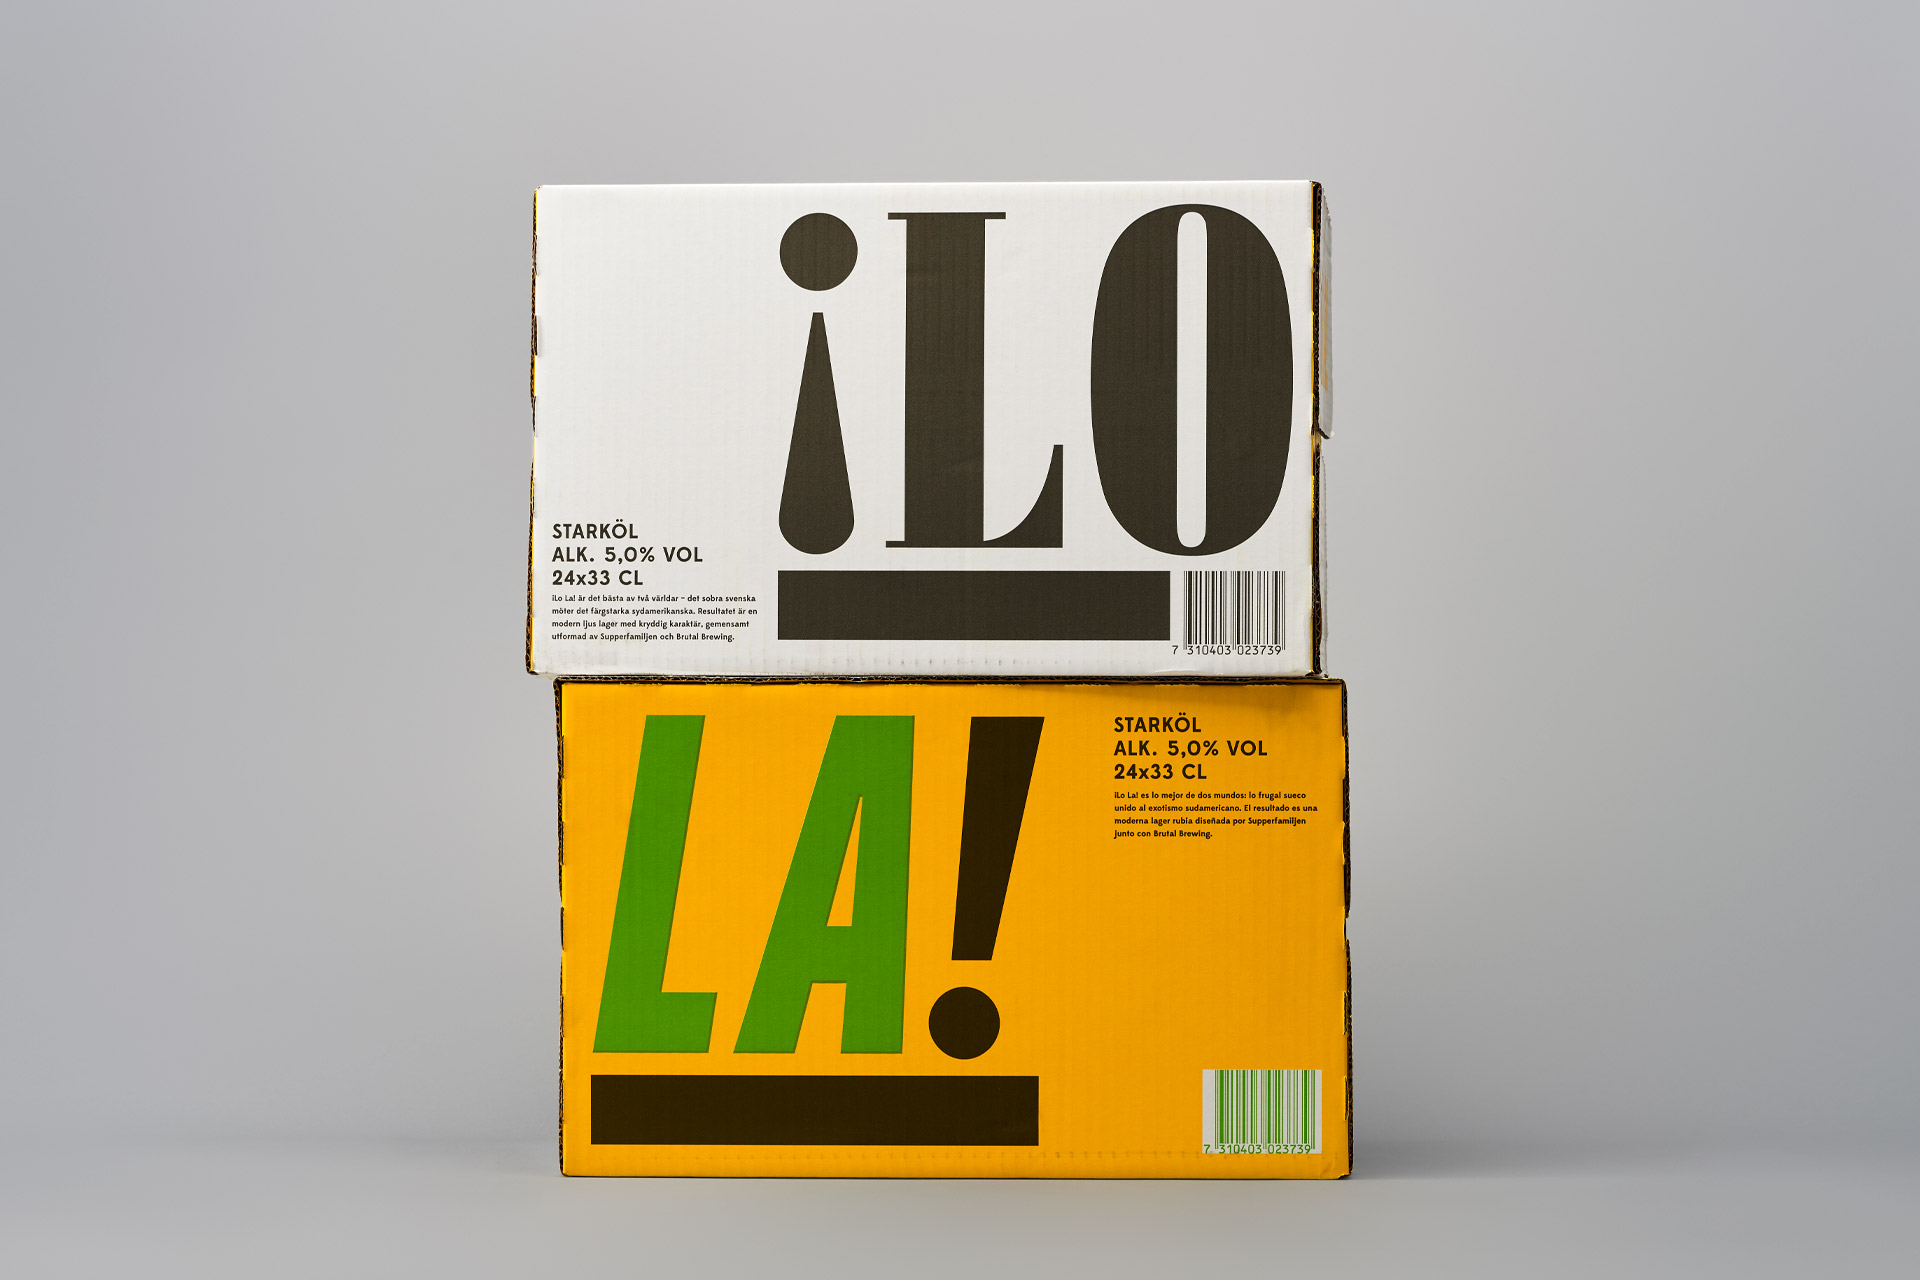 neumeister packaging design Lola! boxes